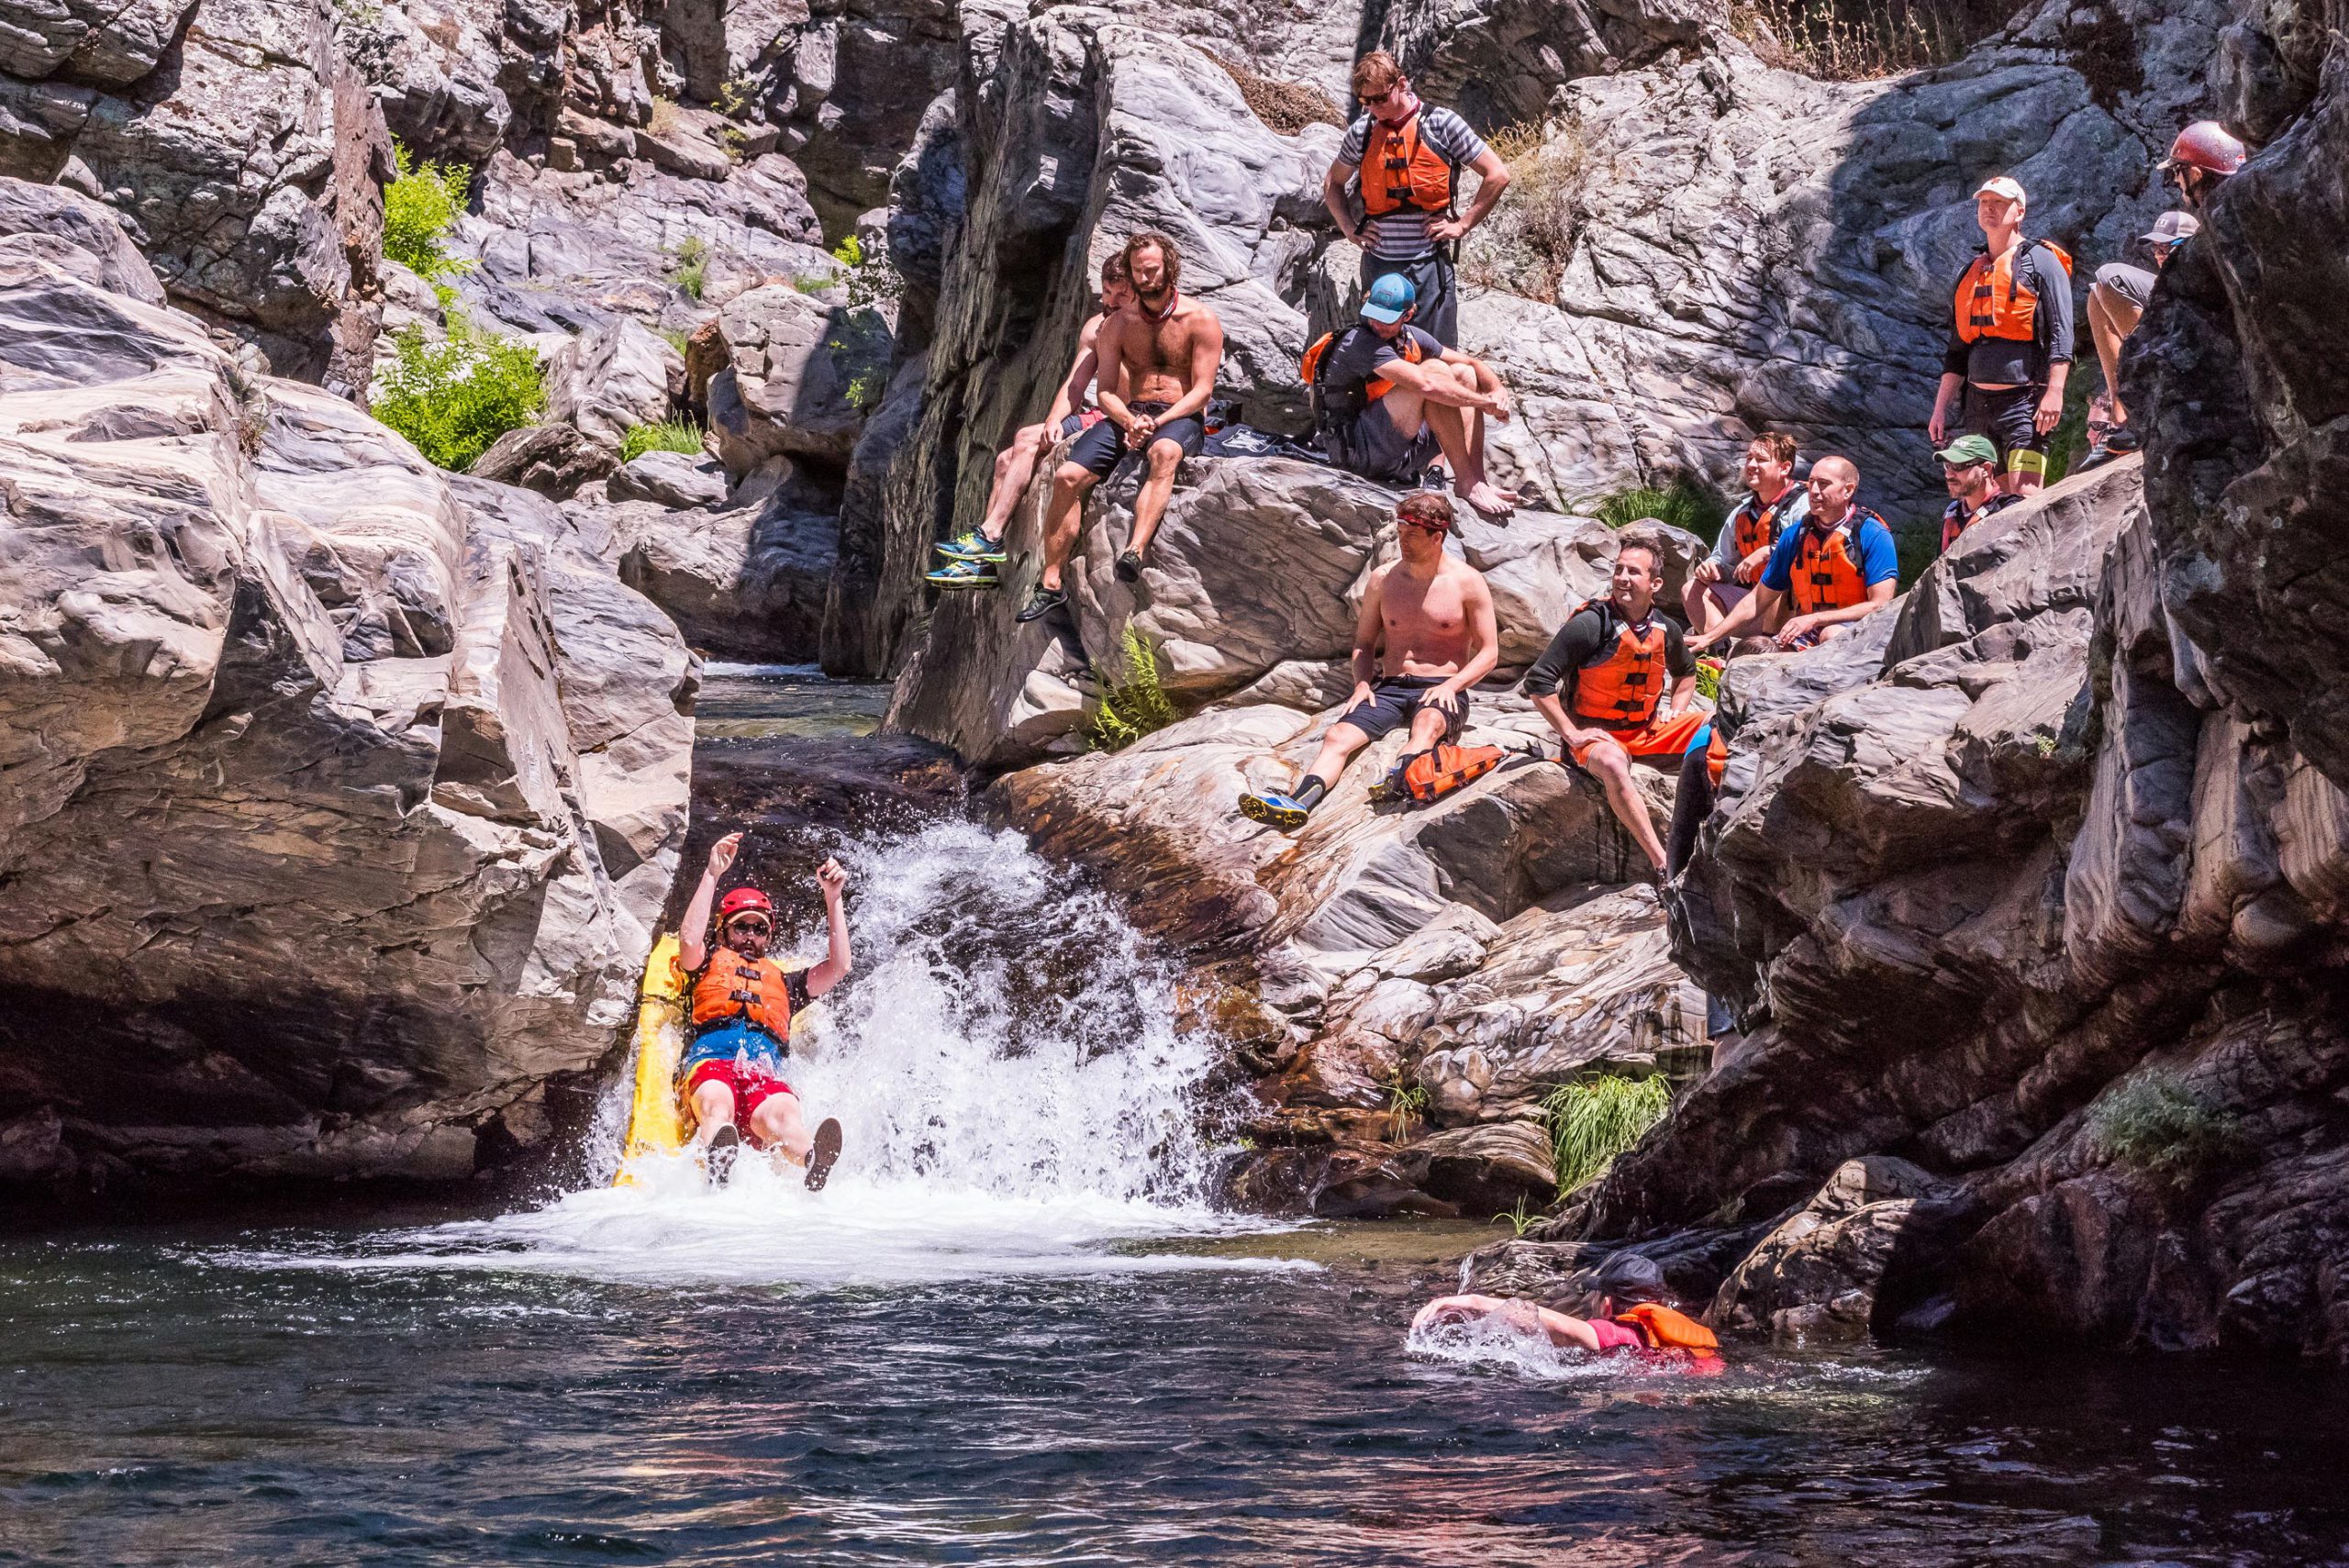 Vegas Bachelor Party? No Thanks. Let’s Go Rafting!